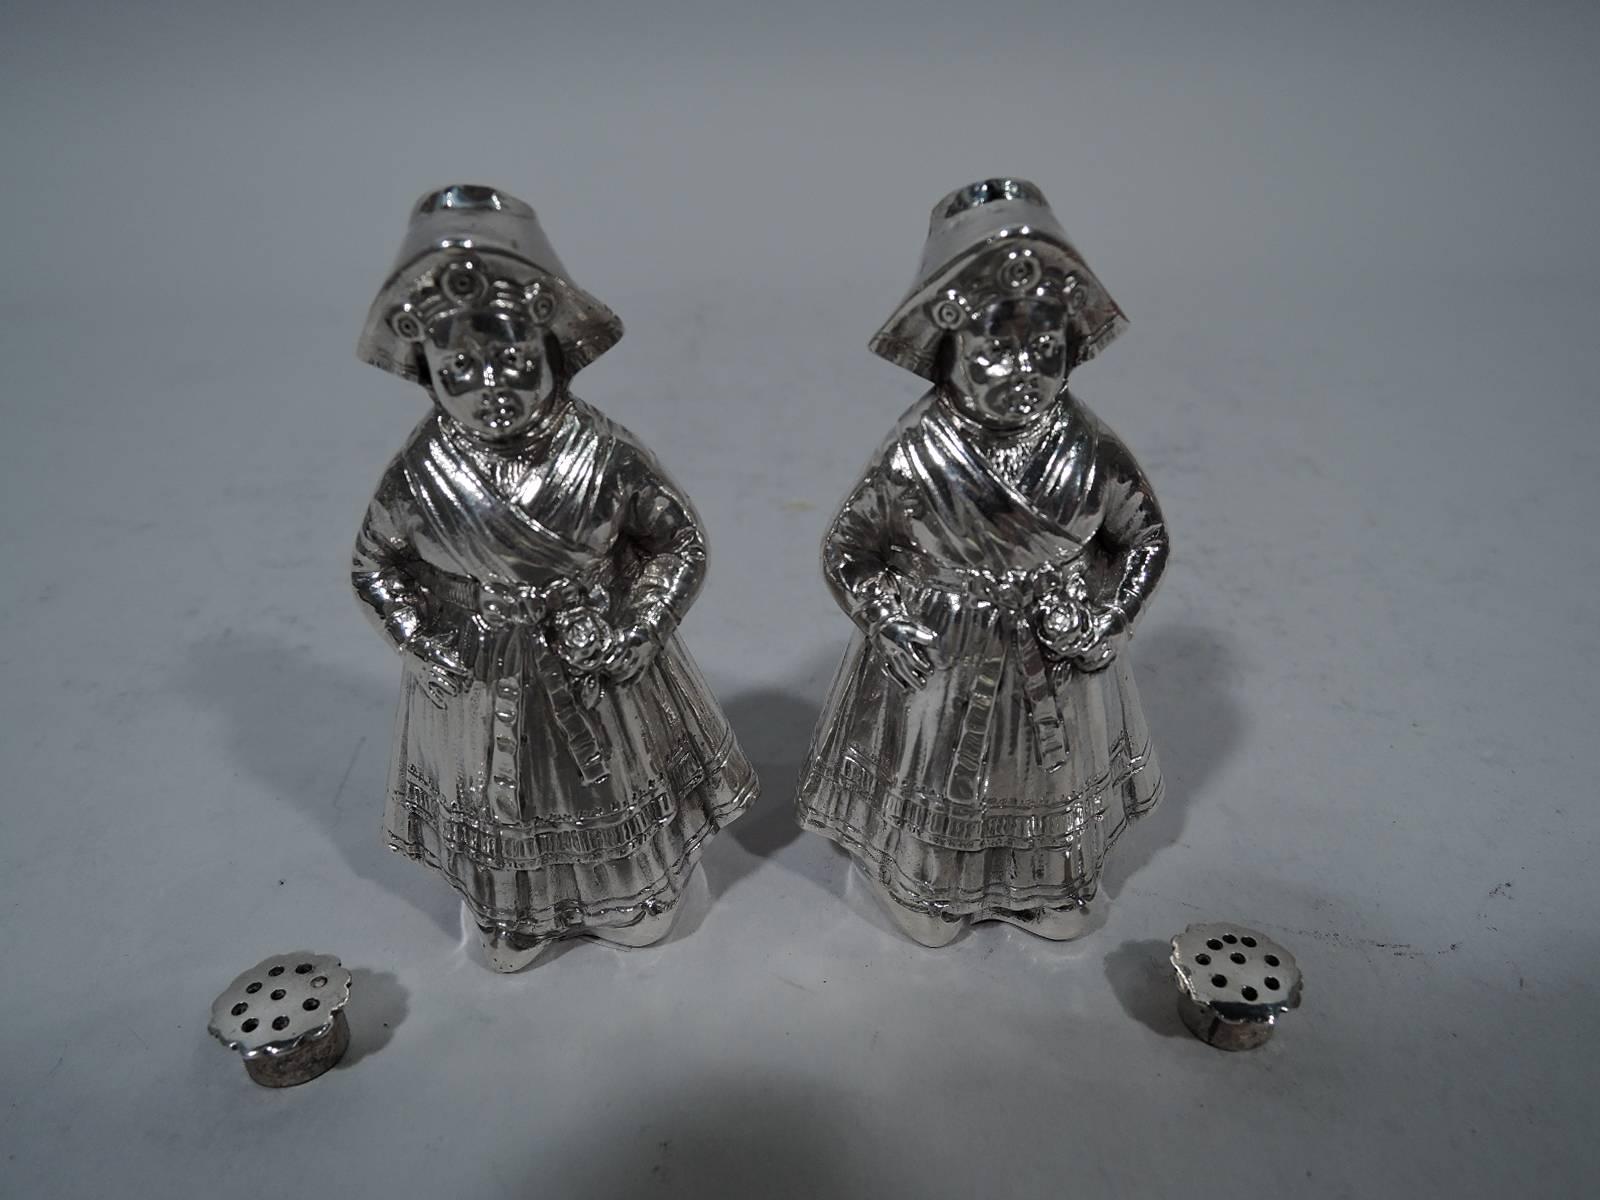 Edwardian Pair of Antique German Sterling Silver Country Girl Salt and Pepper Shakers